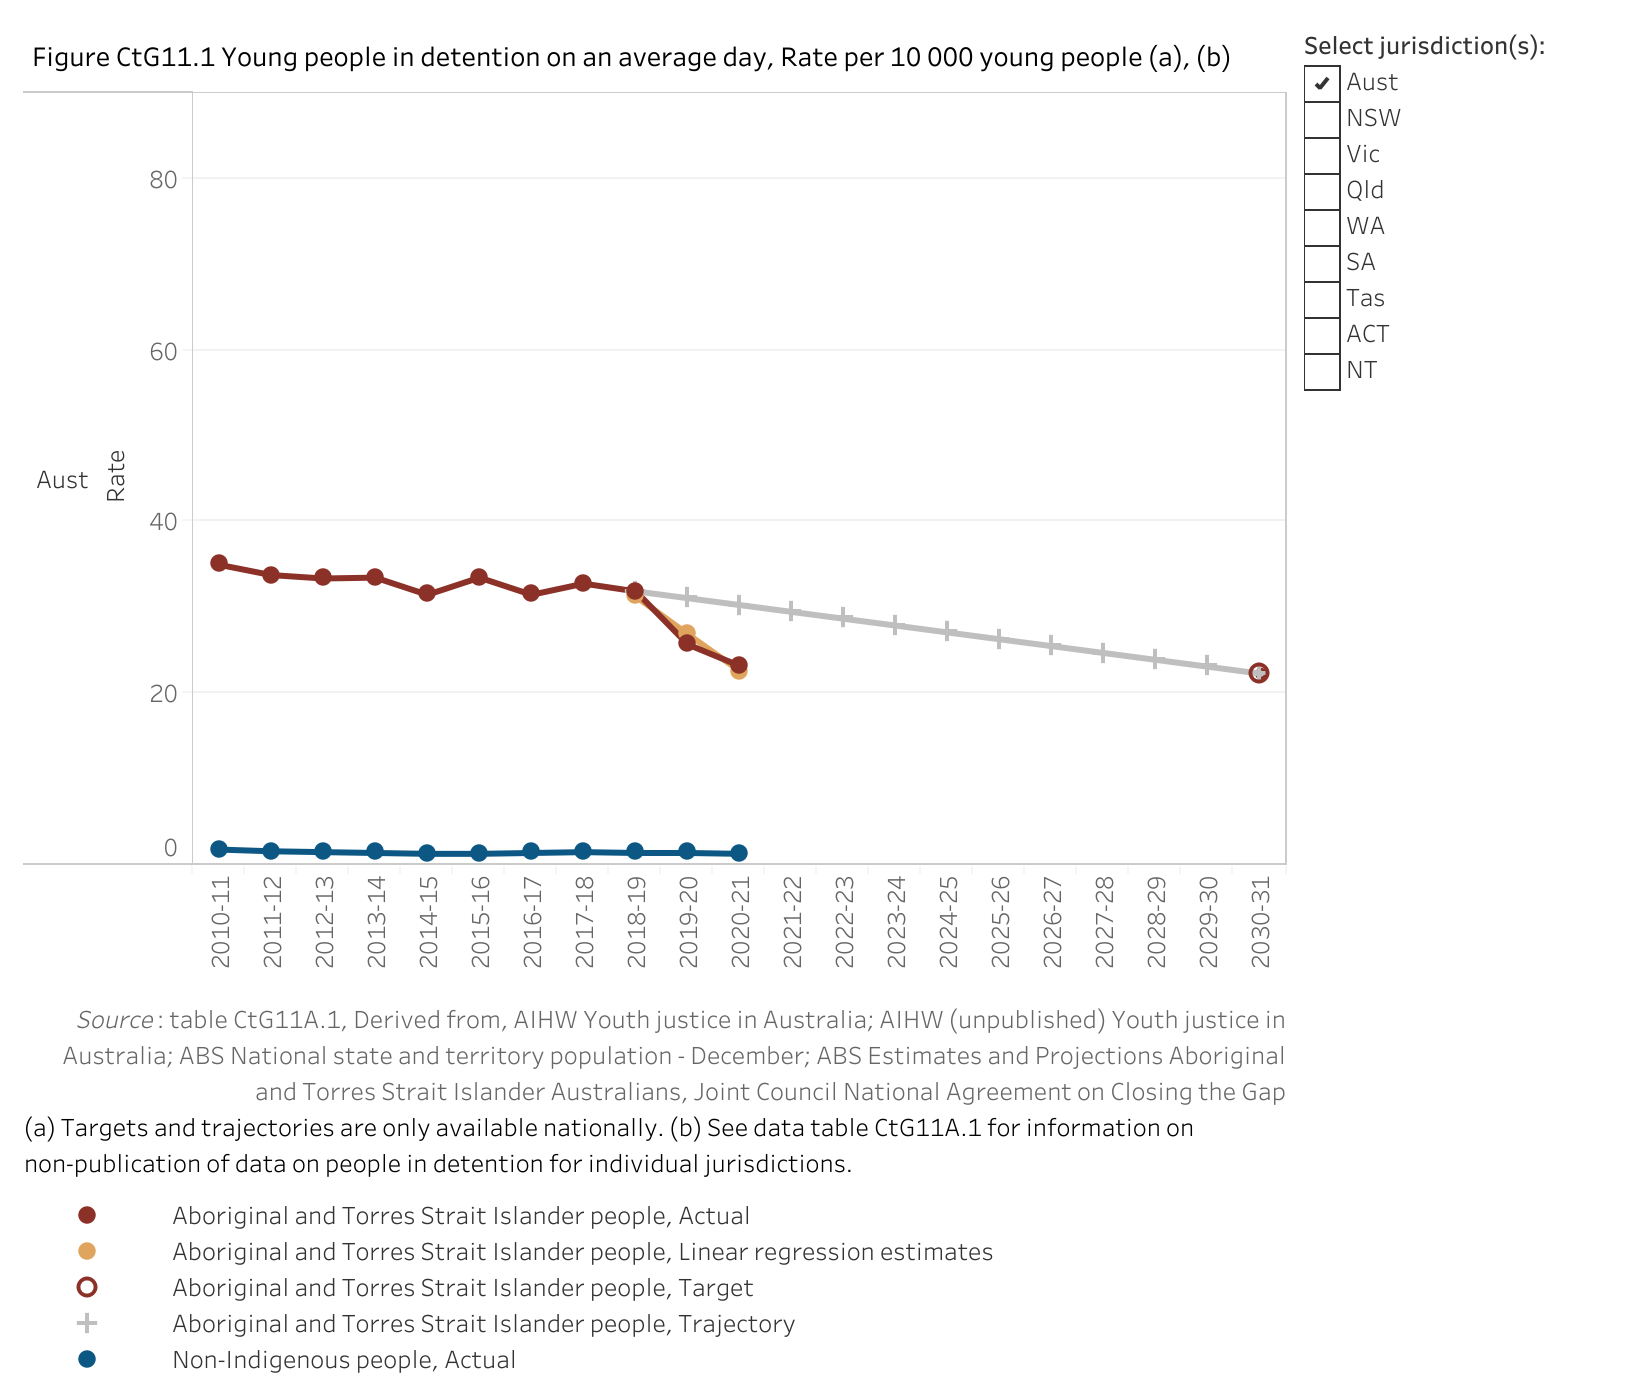 Figure CtG11.1. Line chart showing the rate of Aboriginal and Torres Strait Islander children and non-Indigenous children (aged 10 to 17 years) in detention. Along with these rates, a linear regression is displayed that shows the data trend for the target. The aim under Closing the Gap is to reduce the rate for Aboriginal and Torres Strait Islander children by at least 30 per cent. With the 2018-19 baseline value of 31.9 per 10 000 young people, this means a reduction to a target value of 22.3 per 10 000 young people by 2031.